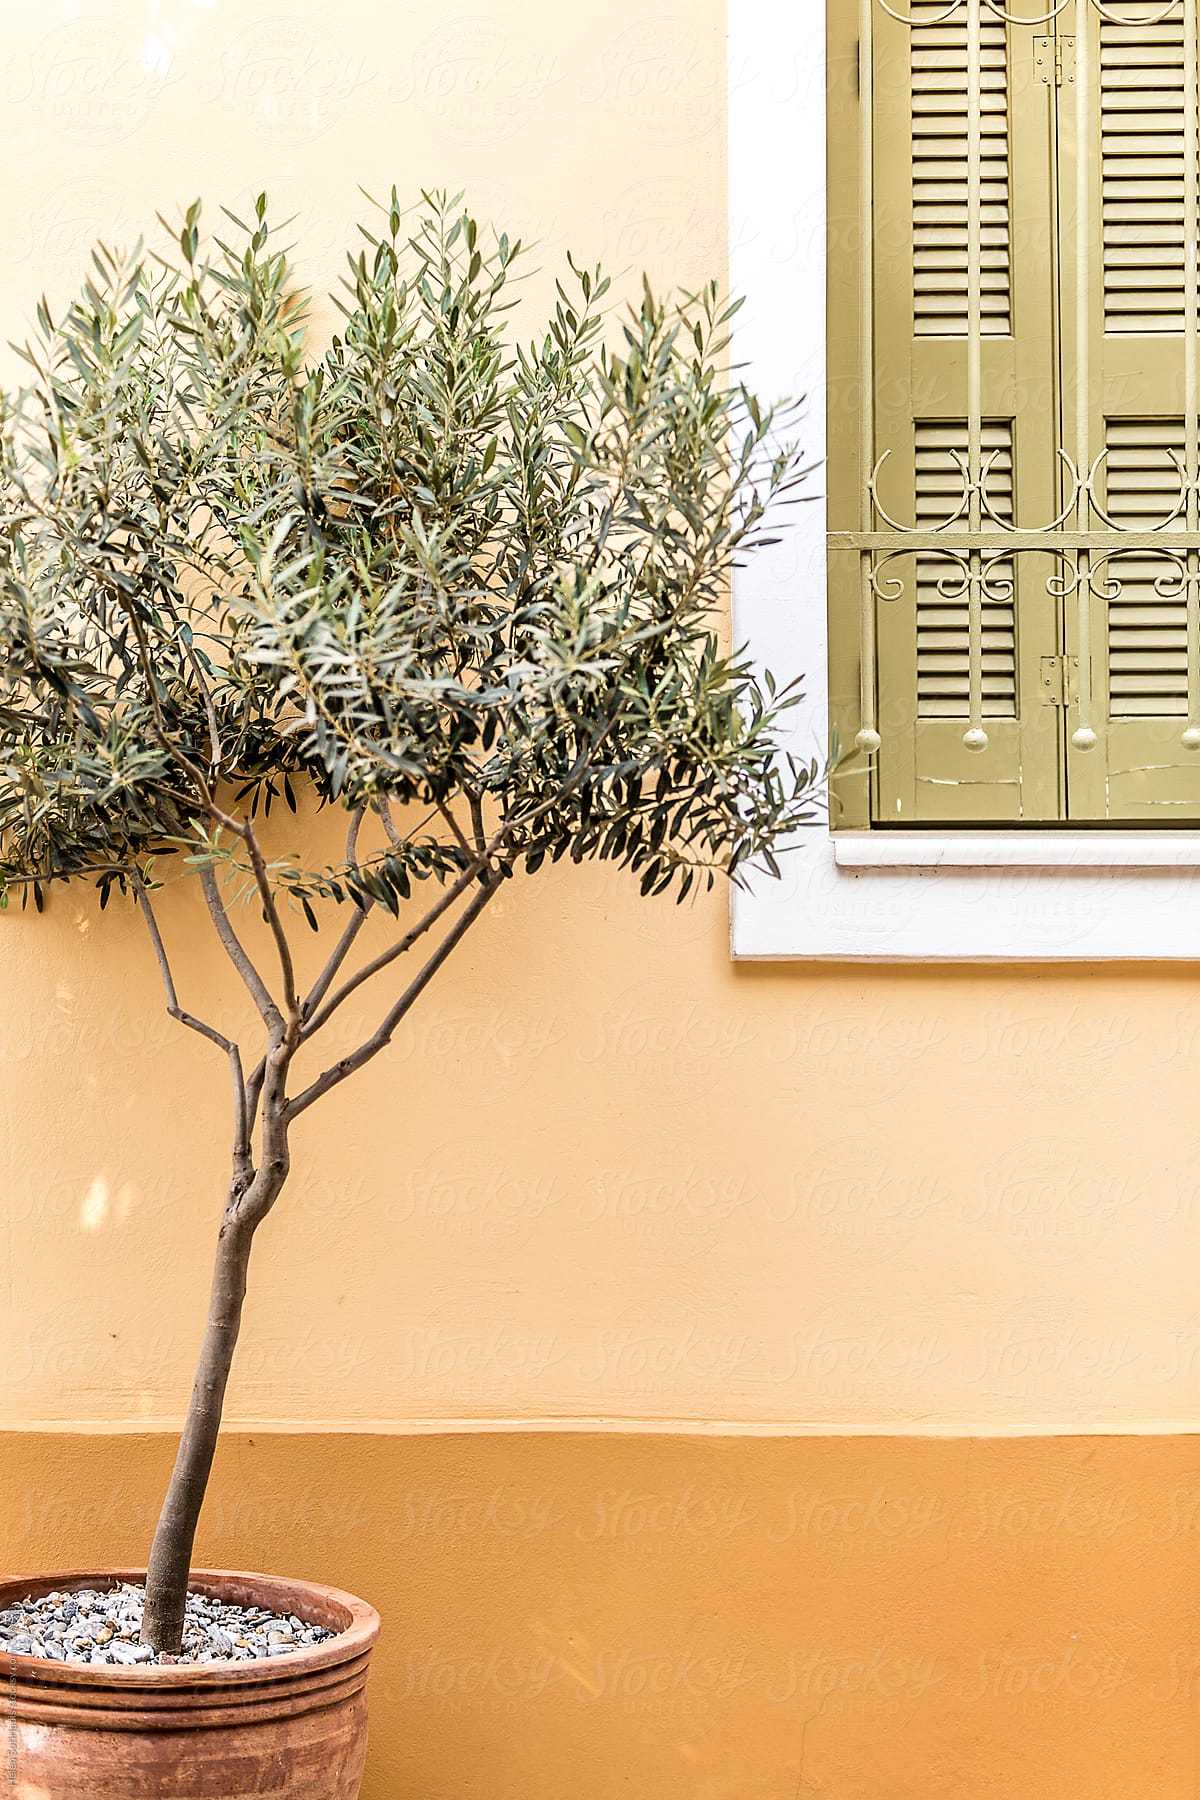 A Visit to Plaka, in Athens, Greece